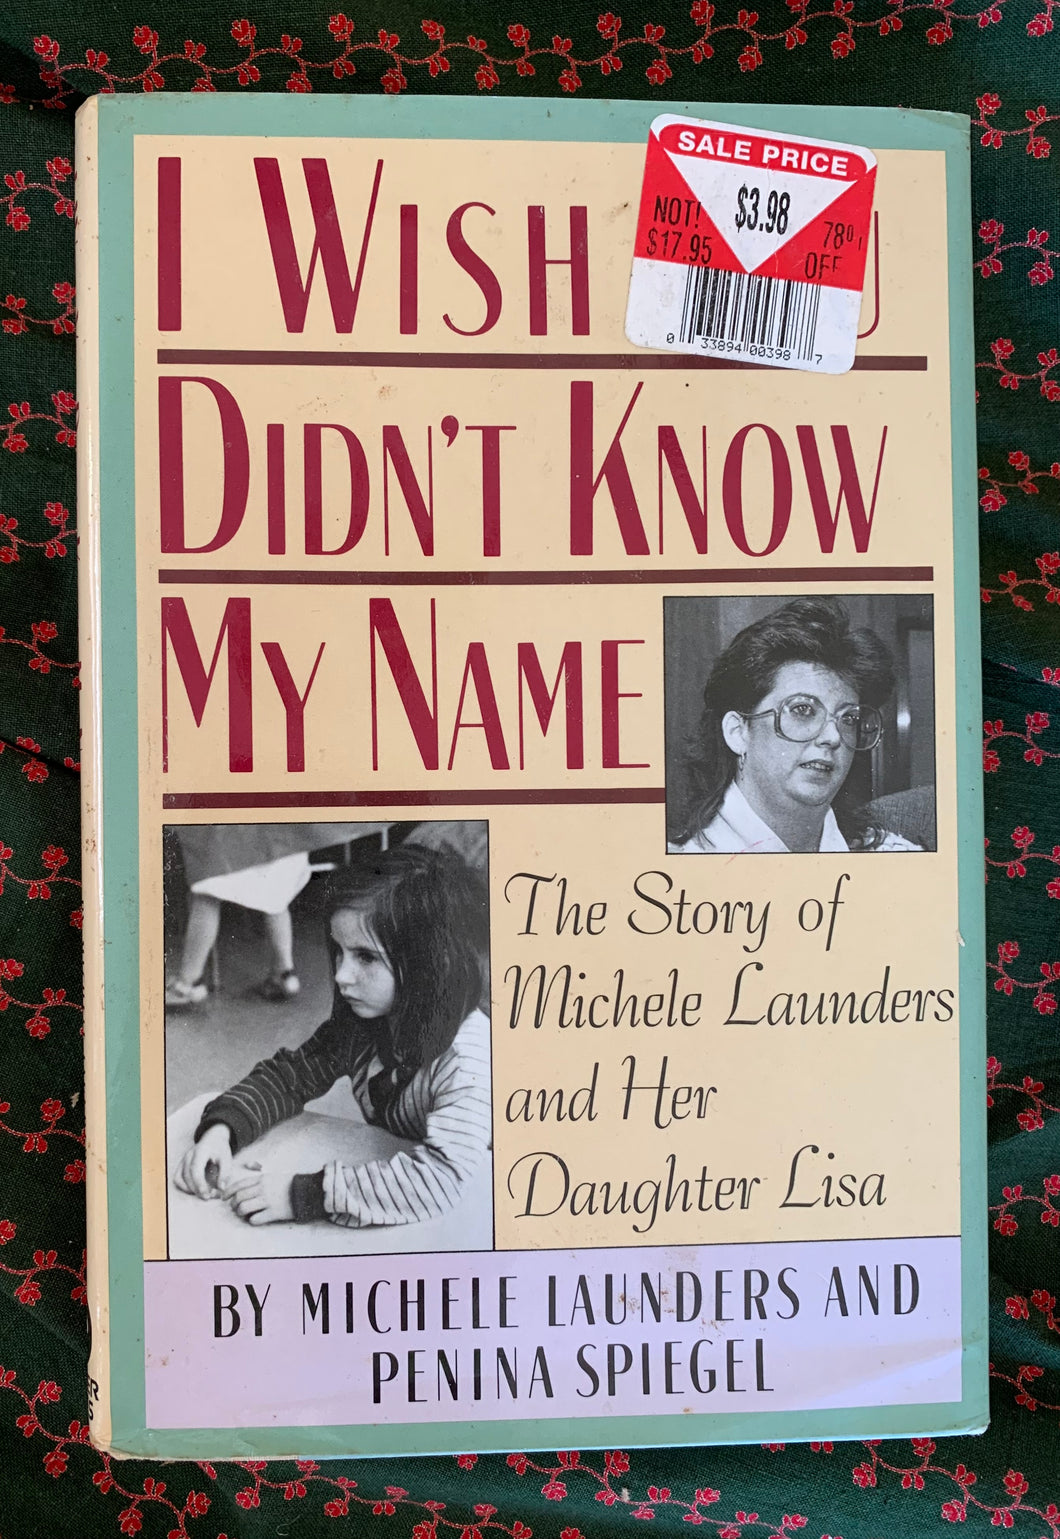 I Wish You Didn't Know My Name: The Story of Michele Launders and Her Daughter Lisa